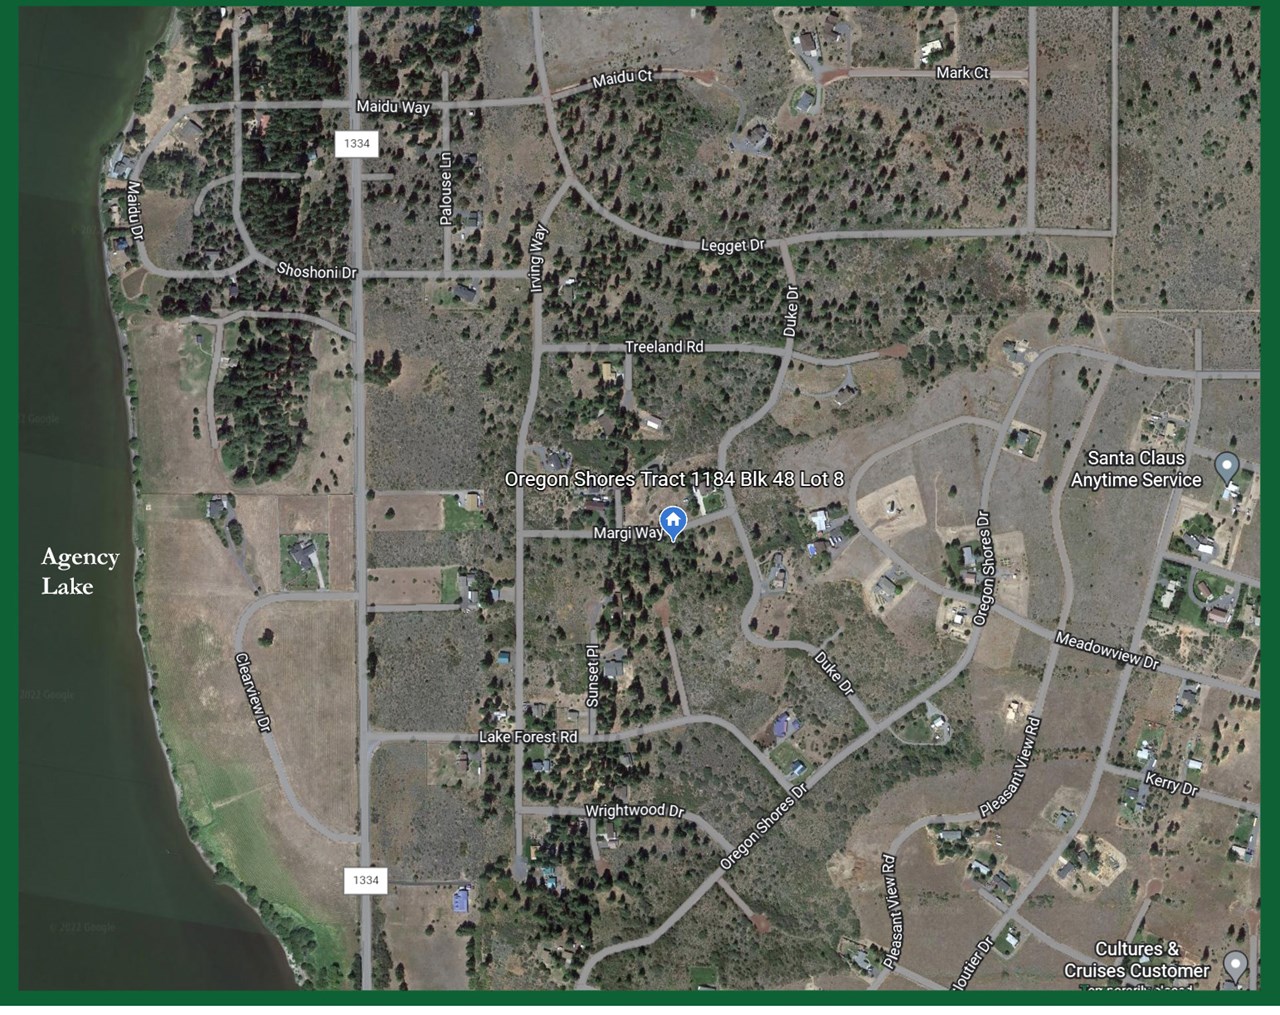 google earth view showing the streets and homes in the neighborhood. it's just a short 10 minute drive to chiloquin from here where they have several shops to get supplies, and a volunteer fire and ambulance service. klamath falls is about 30 minutes away for larger city amenities.